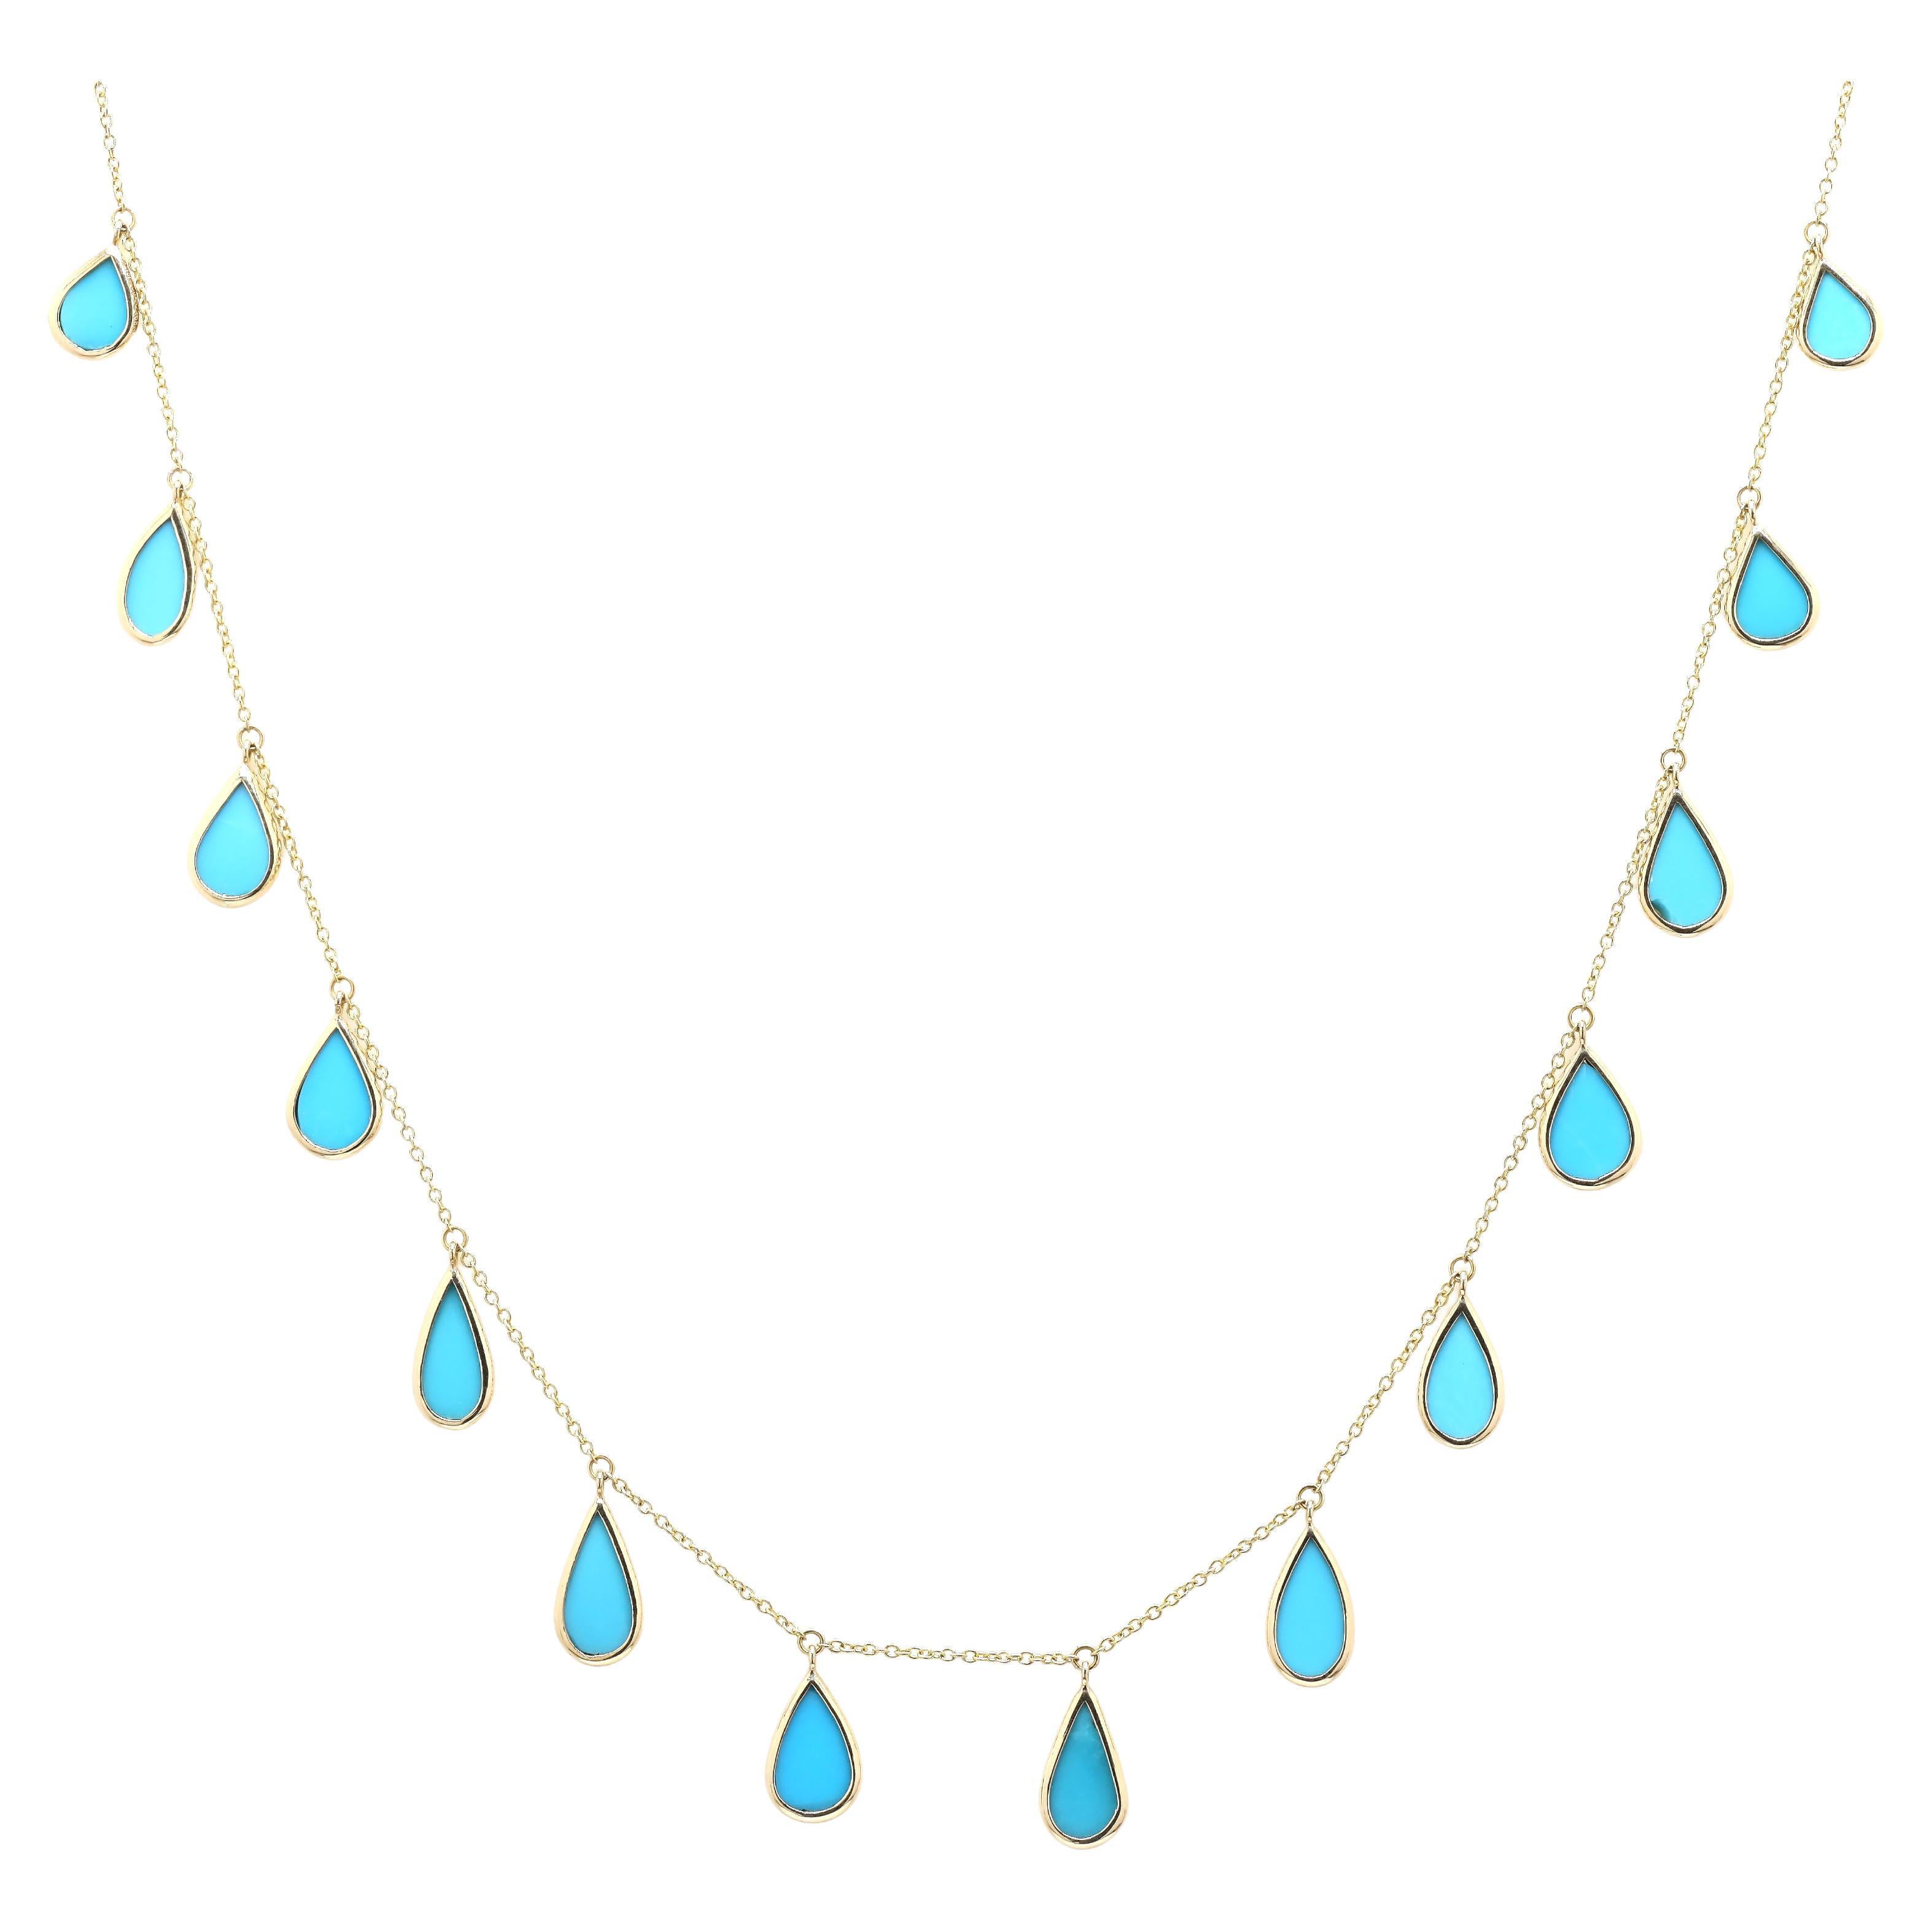 Turquoise Pear Shaped Drop Necklace in 18K Yellow Gold